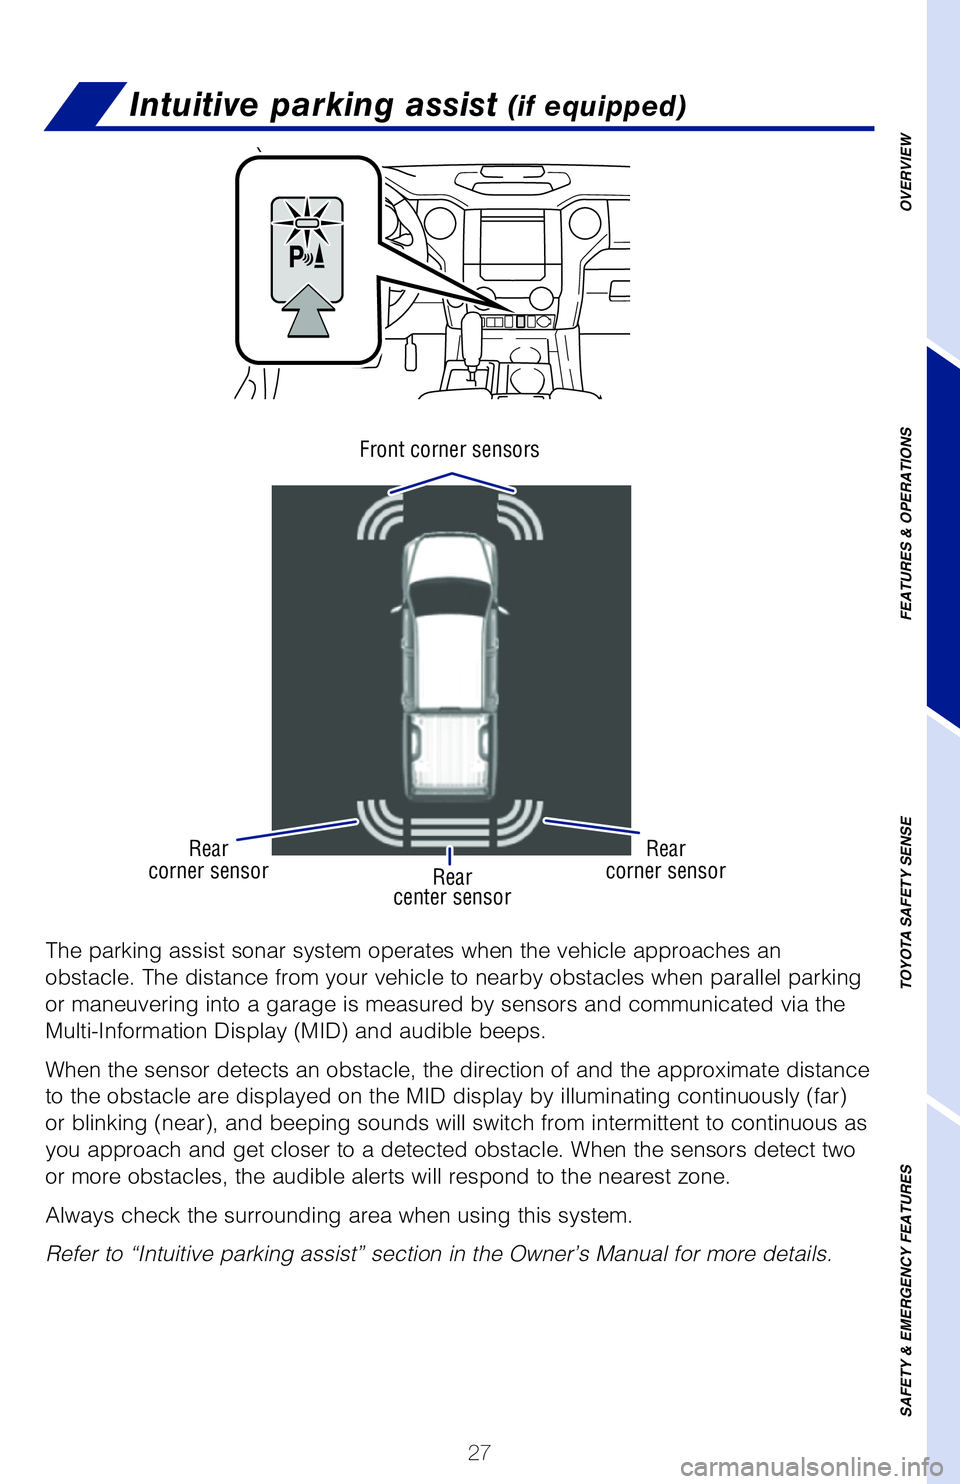 TOYOTA TUNDRA 2020   (in English) Owners Manual 27
Intuitive parking assist (if equipped)
The parking assist sonar system operates when the vehicle approaches an  
obstacle. The distance from your vehicle to nearby obstacles when parallel parking 
